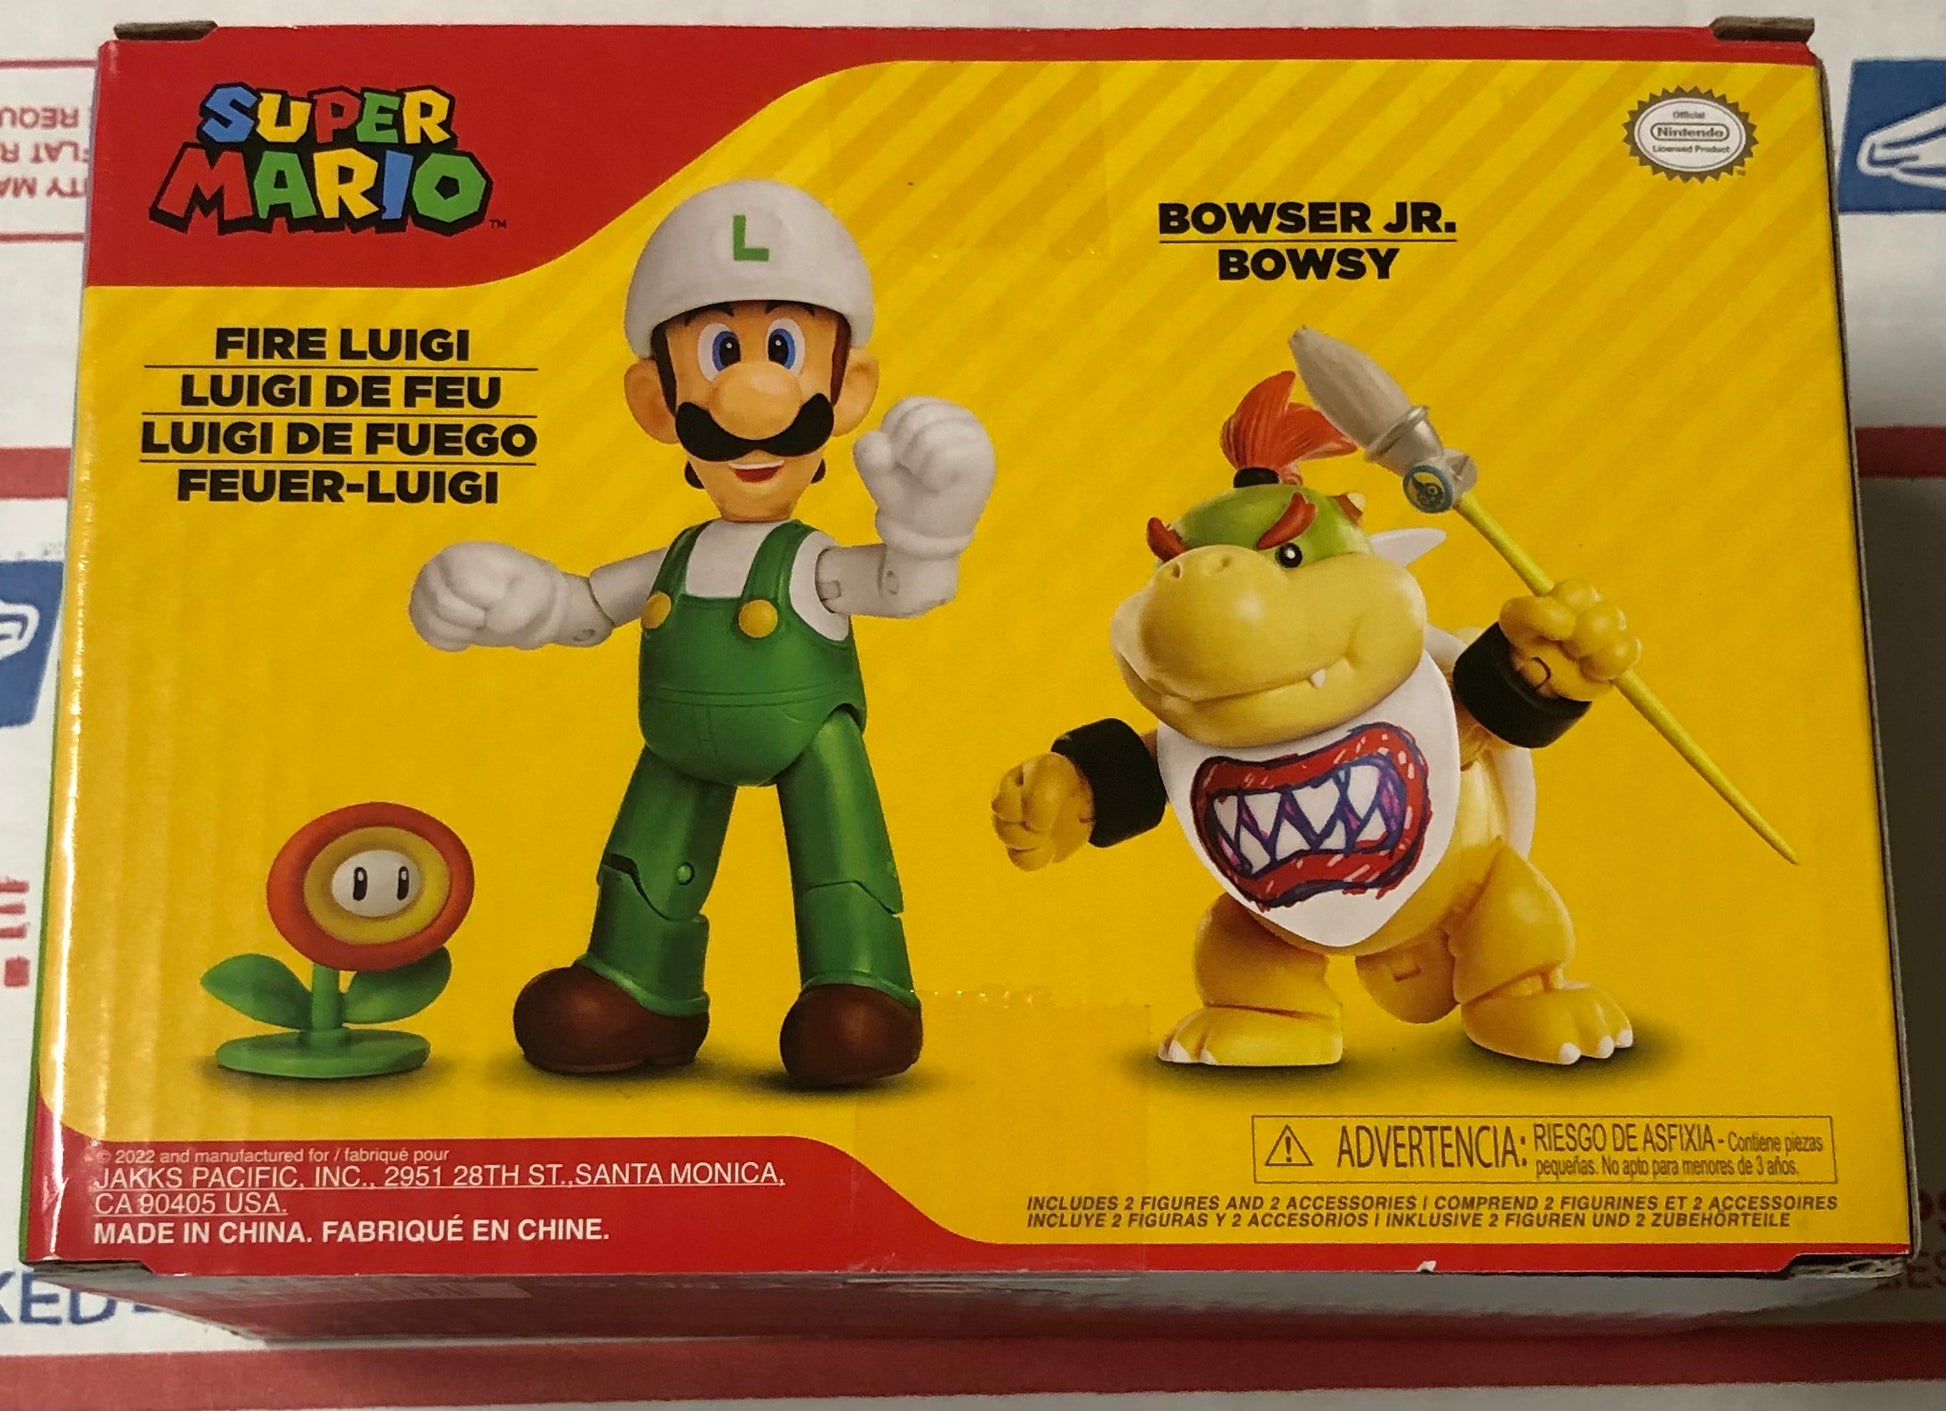 Bowser Jr. from the Super Mario Universe